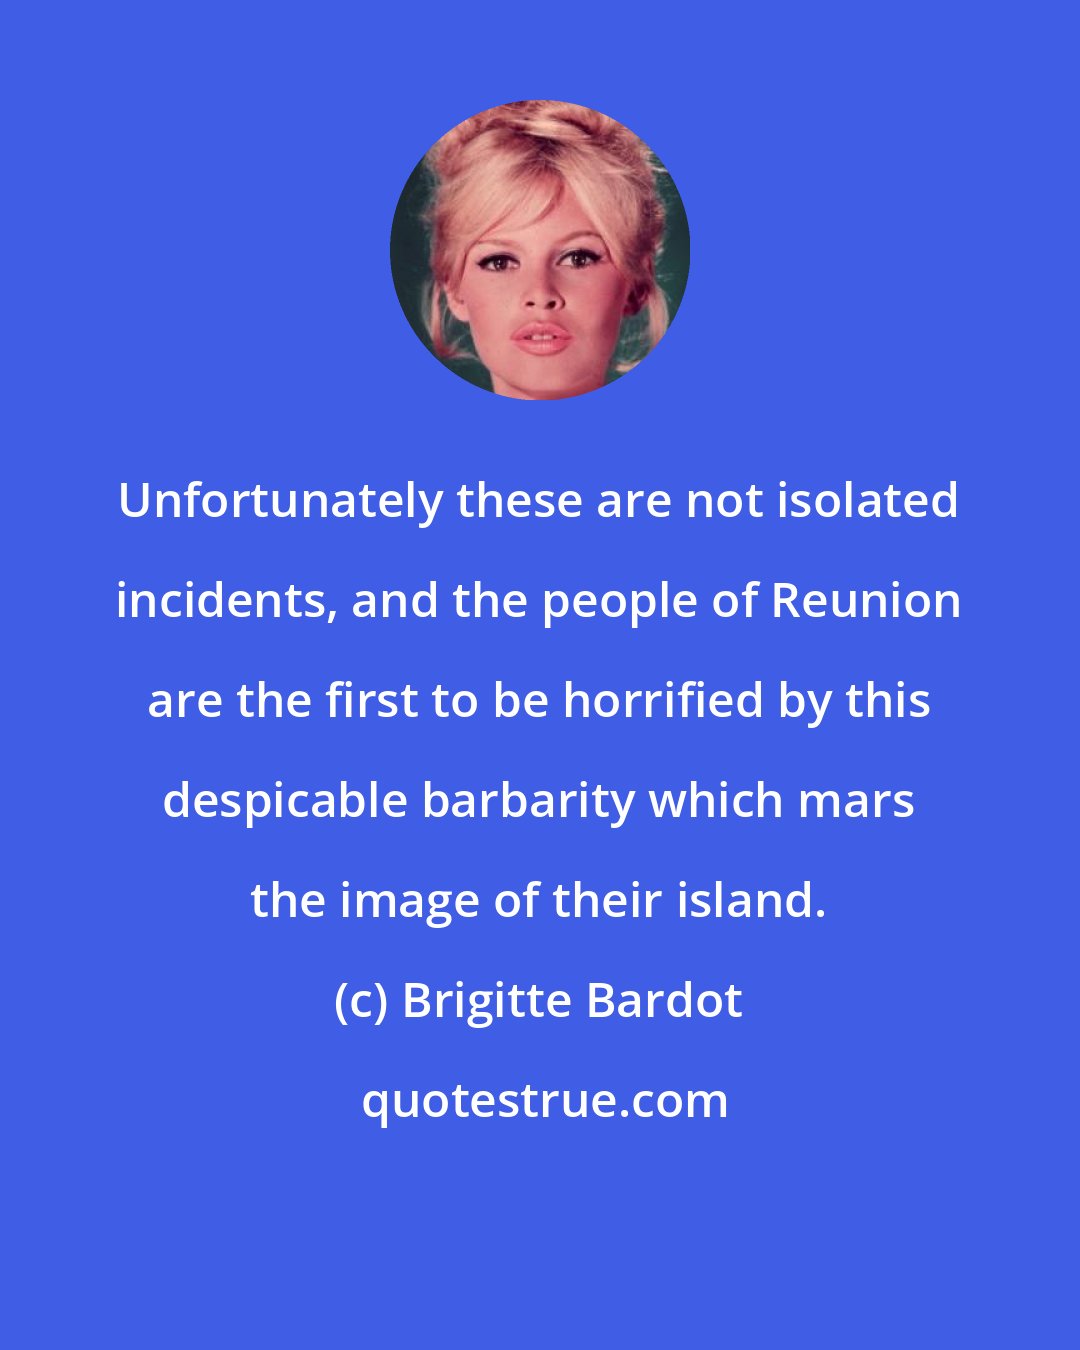 Brigitte Bardot: Unfortunately these are not isolated incidents, and the people of Reunion are the first to be horrified by this despicable barbarity which mars the image of their island.